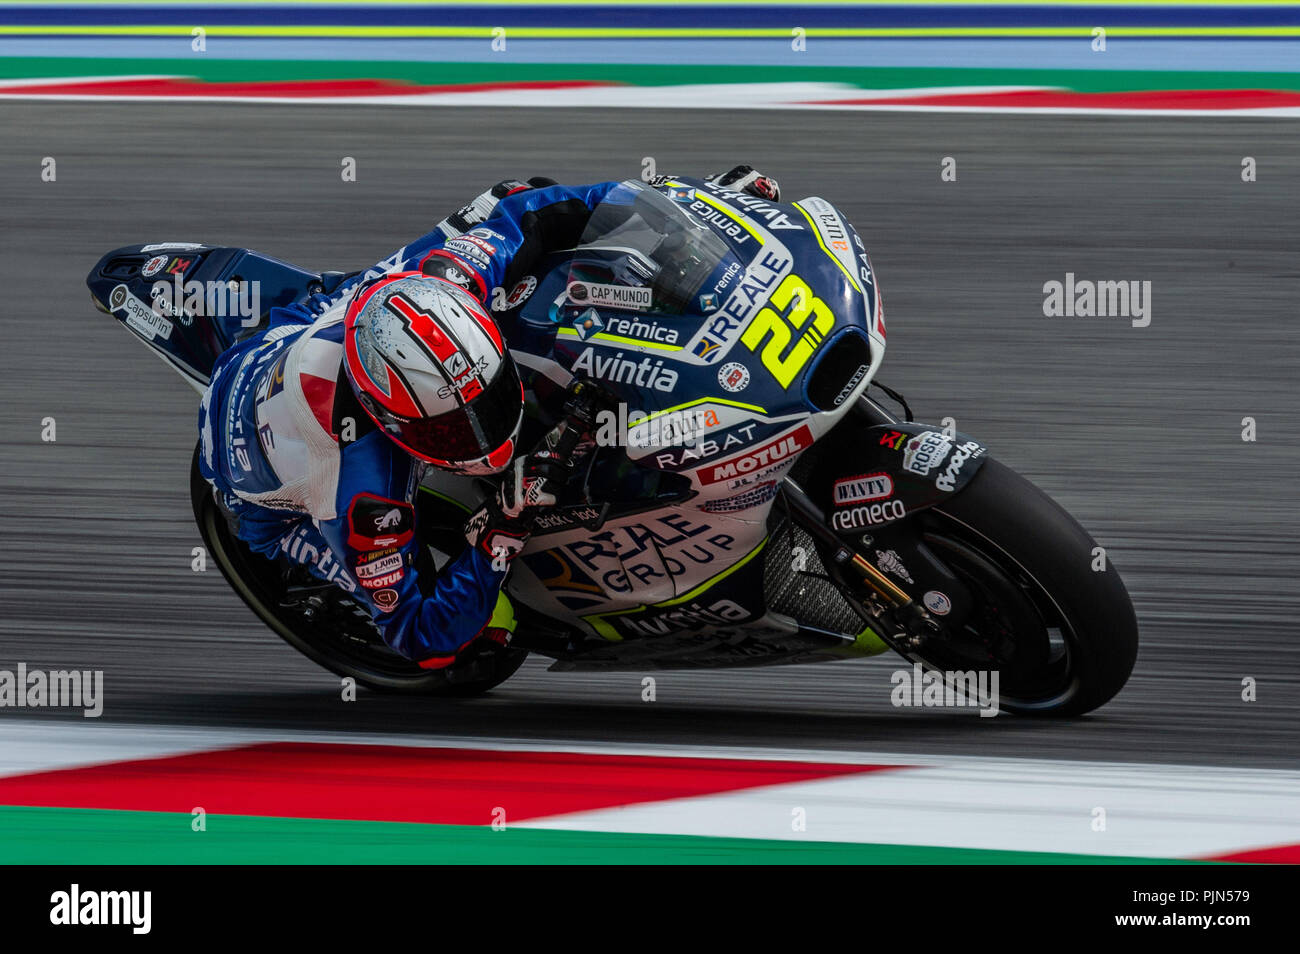 Misano Adriatico, Italy. 07th Sep, 2018. Christophe Ponsson during Friday FP2 in Misano Credit: Lorenzo Di Cola/Pacific Press/Alamy Live News Stock Photo